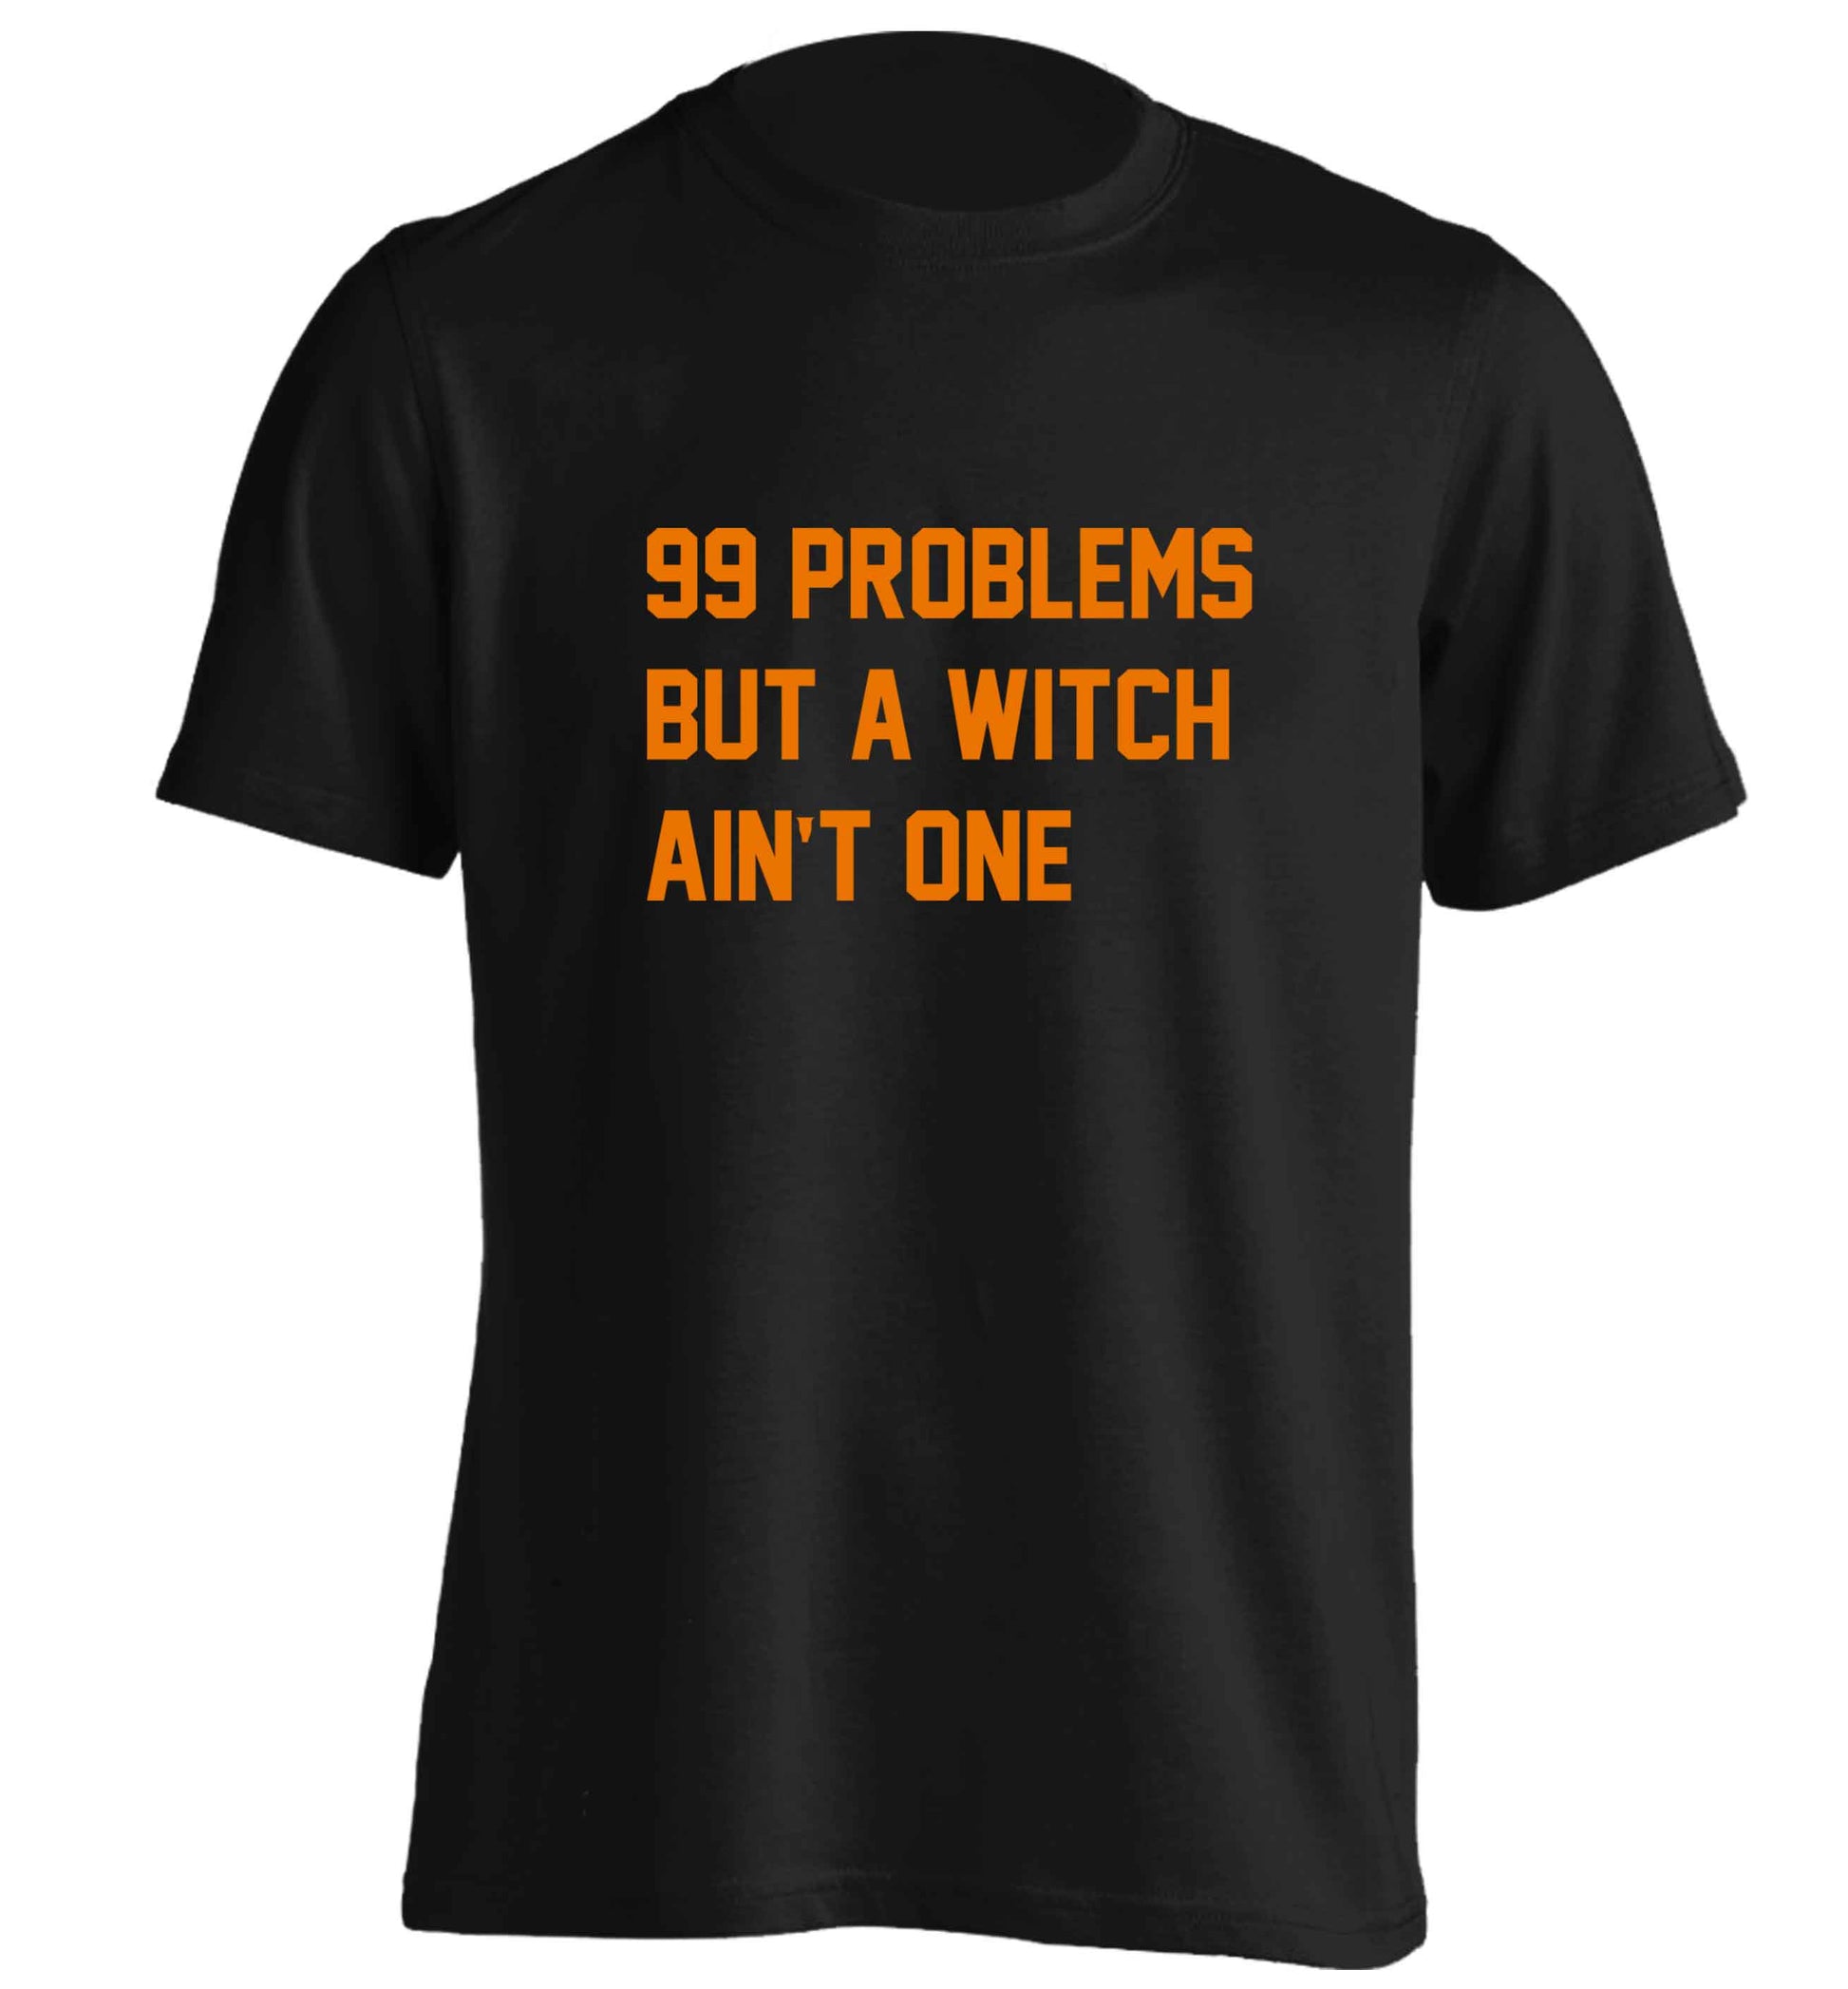 99 Problems but a witch aint one adults unisex black Tshirt 2XL